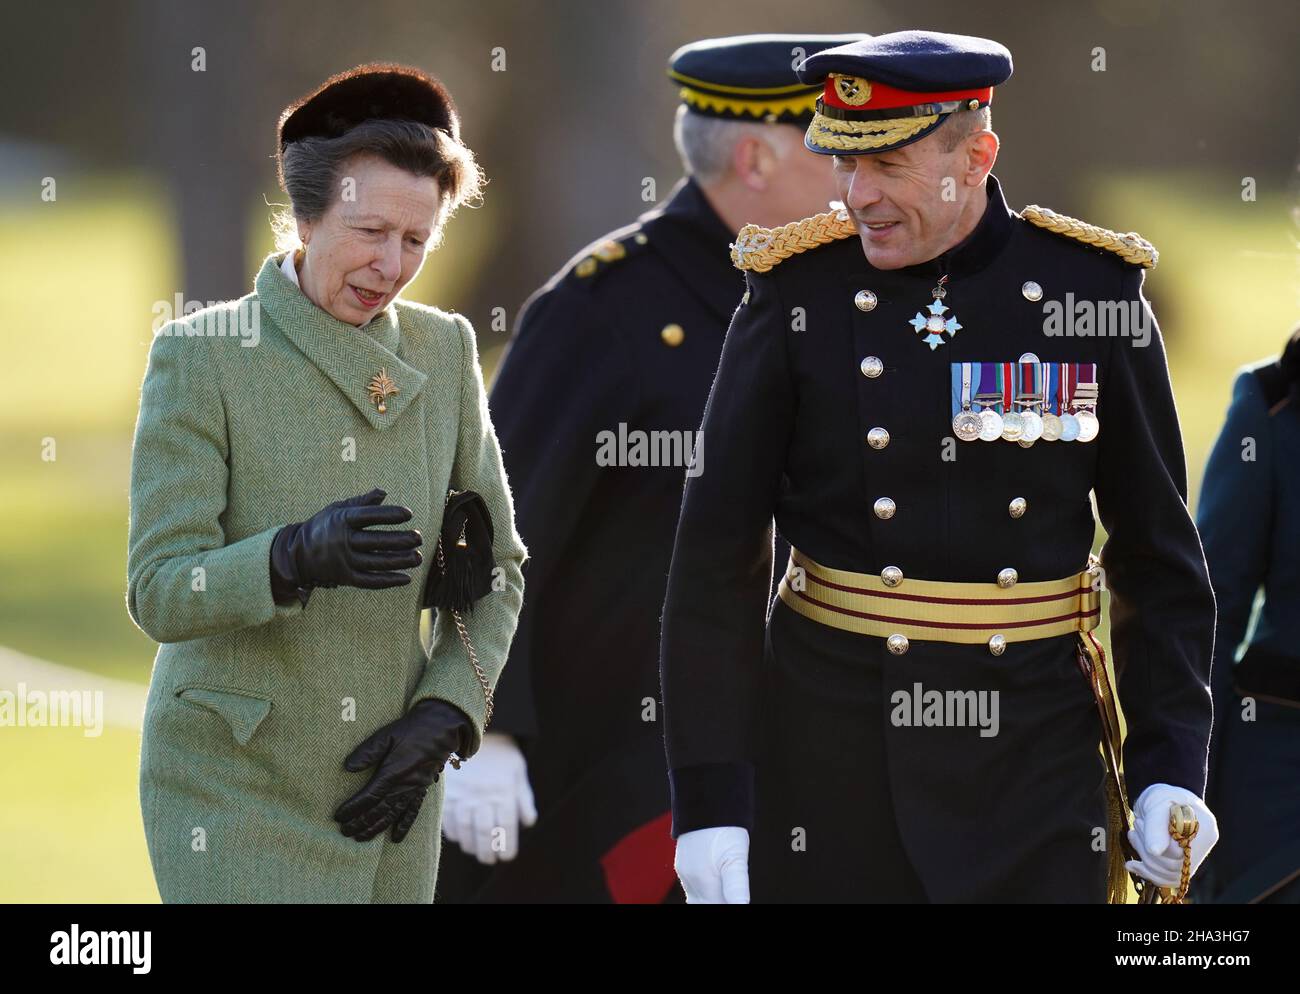 The Princess Royal (left), representing the Queen as the Reviewing Officer arrives for the Sovereign's Parade at the Royal Military Academy Sandhurst (RMAS) in Camberley. The parade marks the completion of 44 weeks of intensive training for the Officer Cadets of Commissioning Course 211 all of whom will officially hold the Queen's Commission at the stroke of midnight on the day of the parade. In addition, there are 35 international cadets from 26 countries including: Armenia, Ethiopia, Morocco, Montenegro, Iraq and Uruguay. Picture date: Friday December 10, 2021. Stock Photo